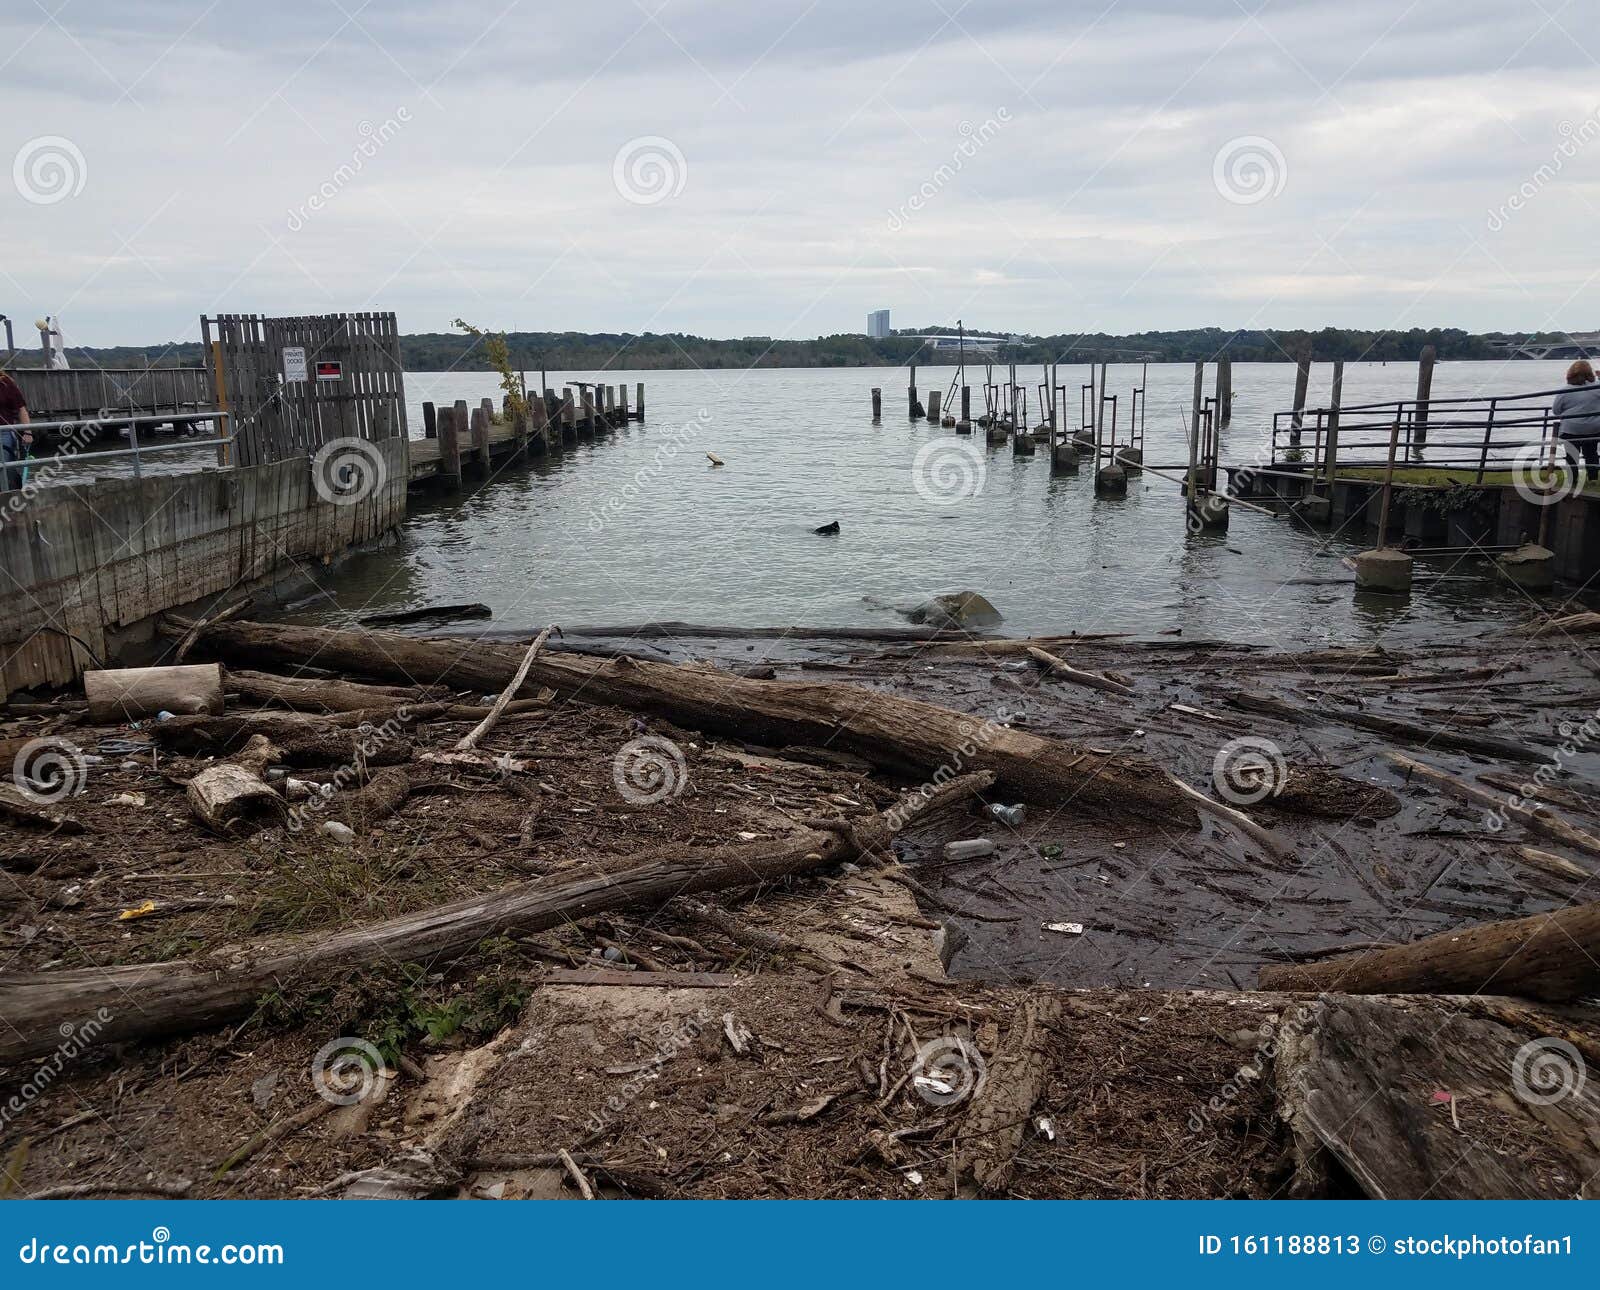 River Water With Wood And Debris Floating Stock Image Image Of